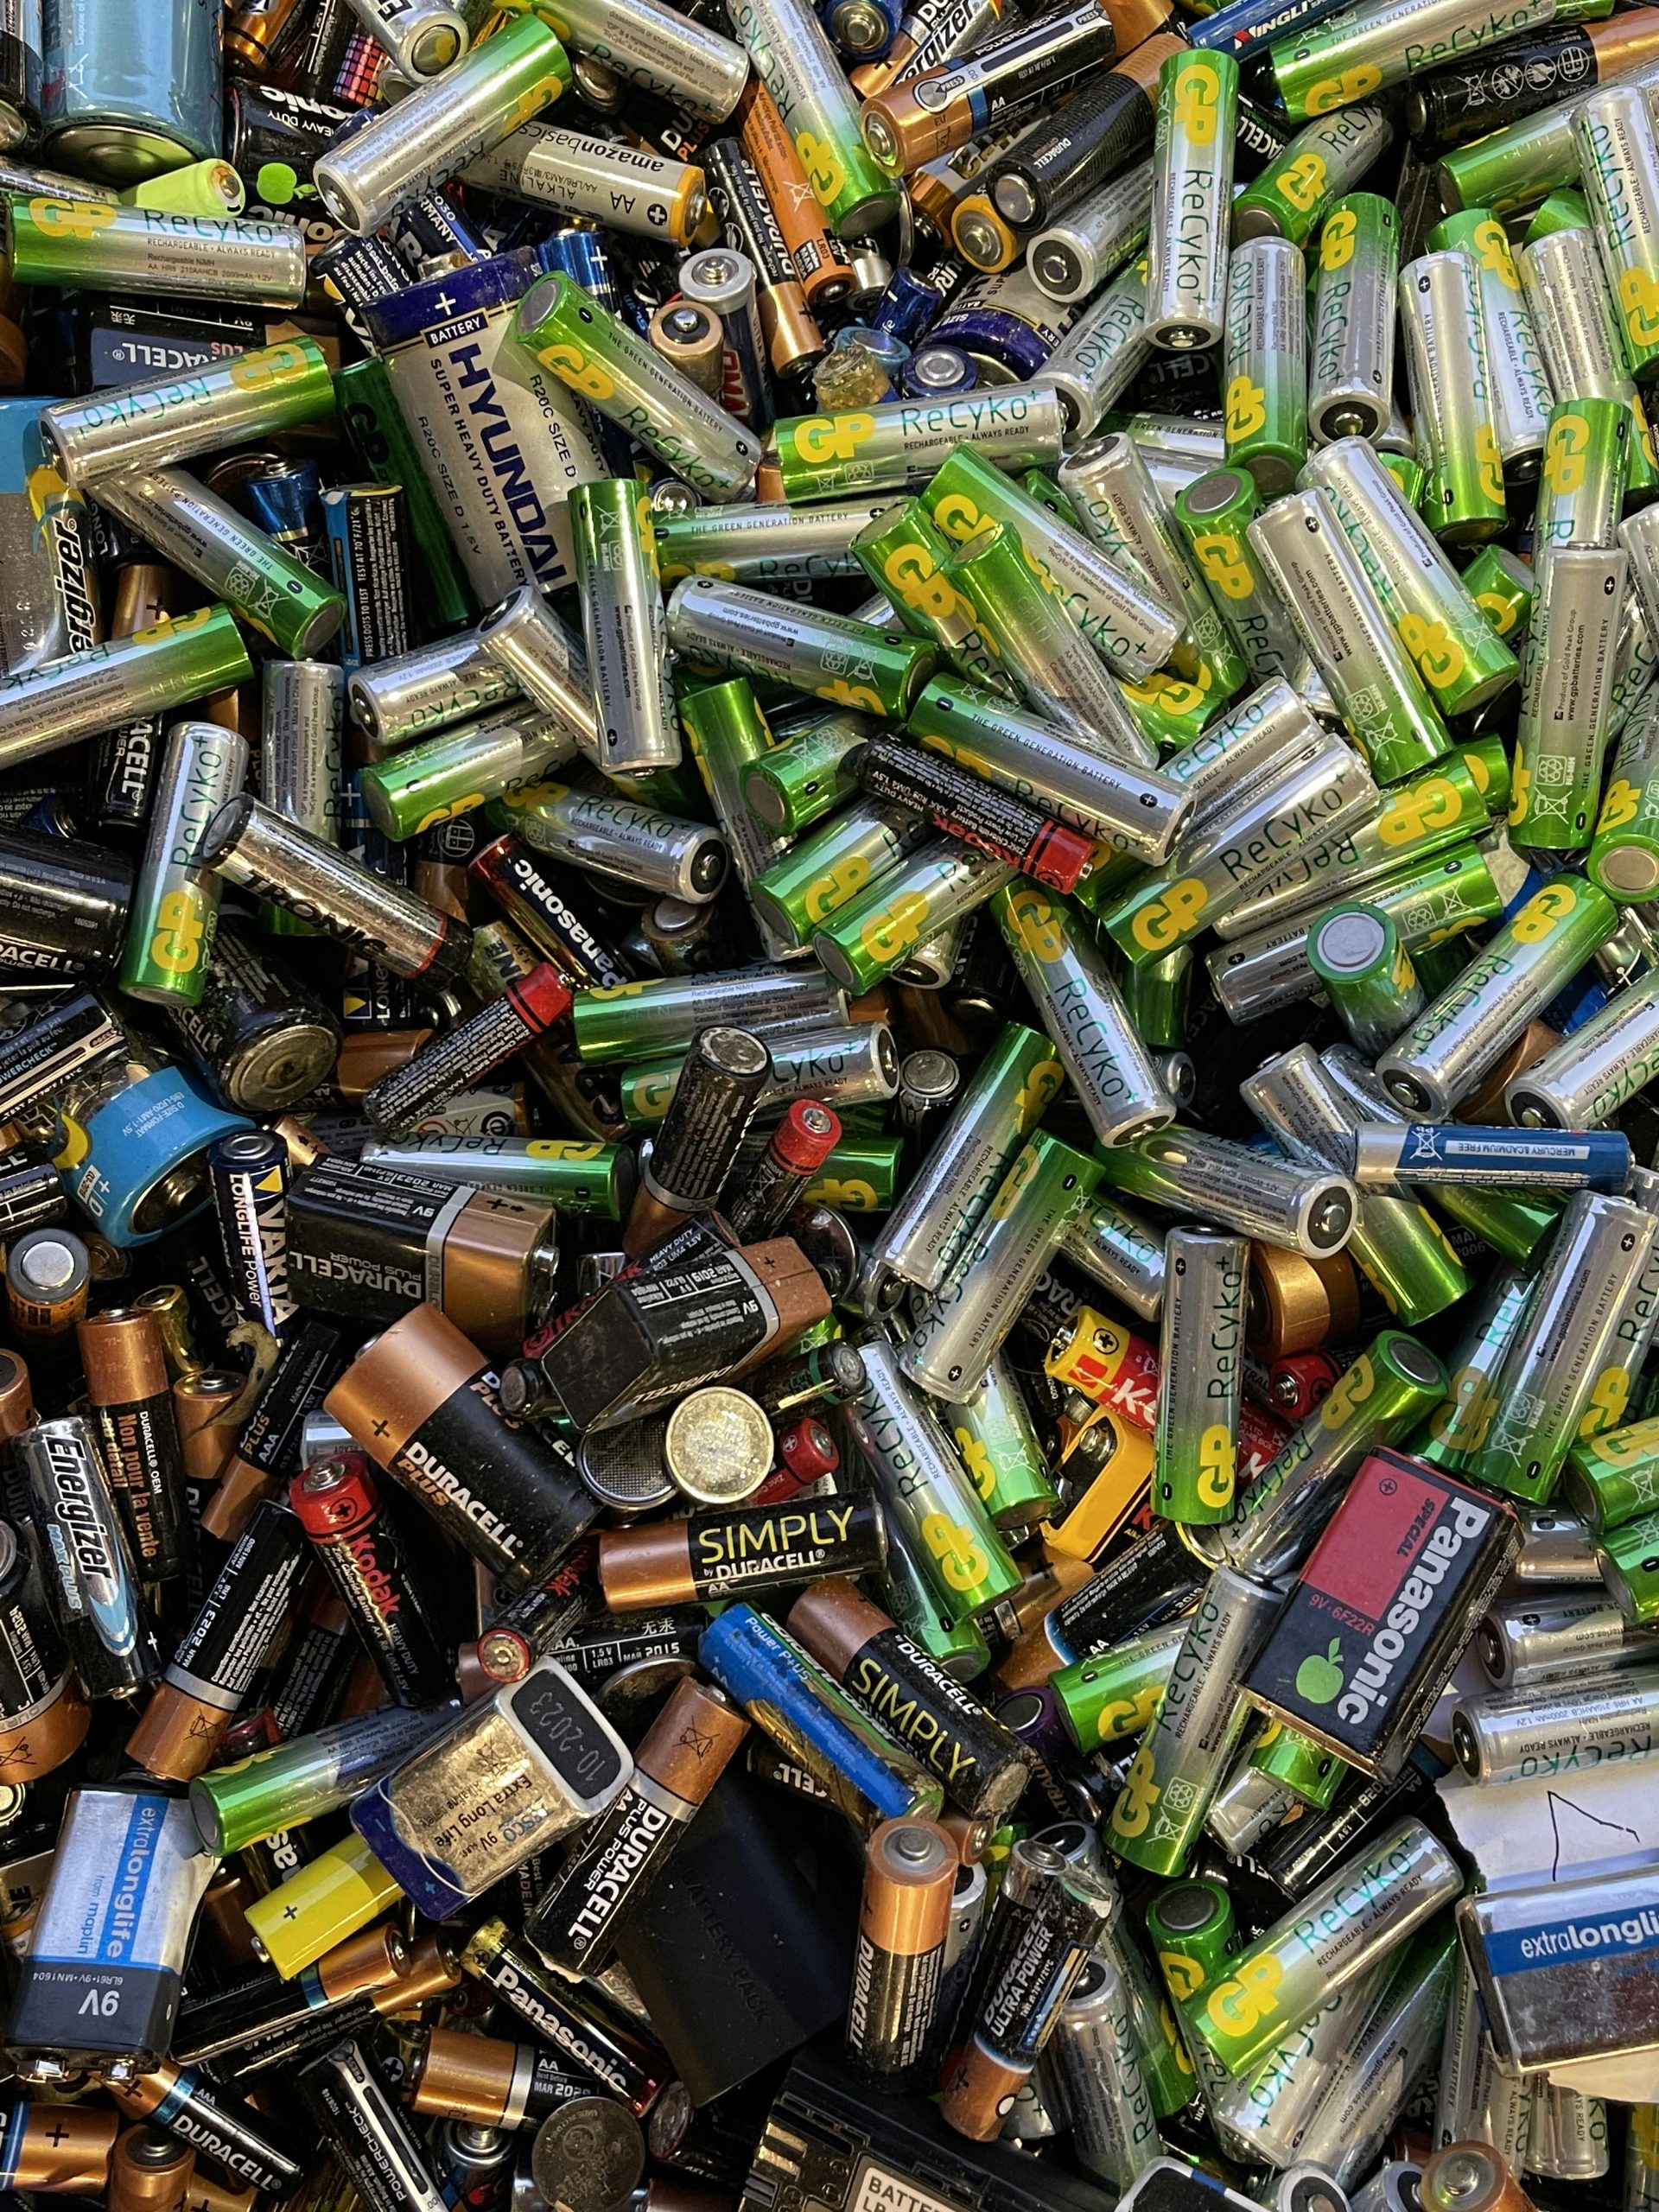 How Can I Recycle My Old Electronics?